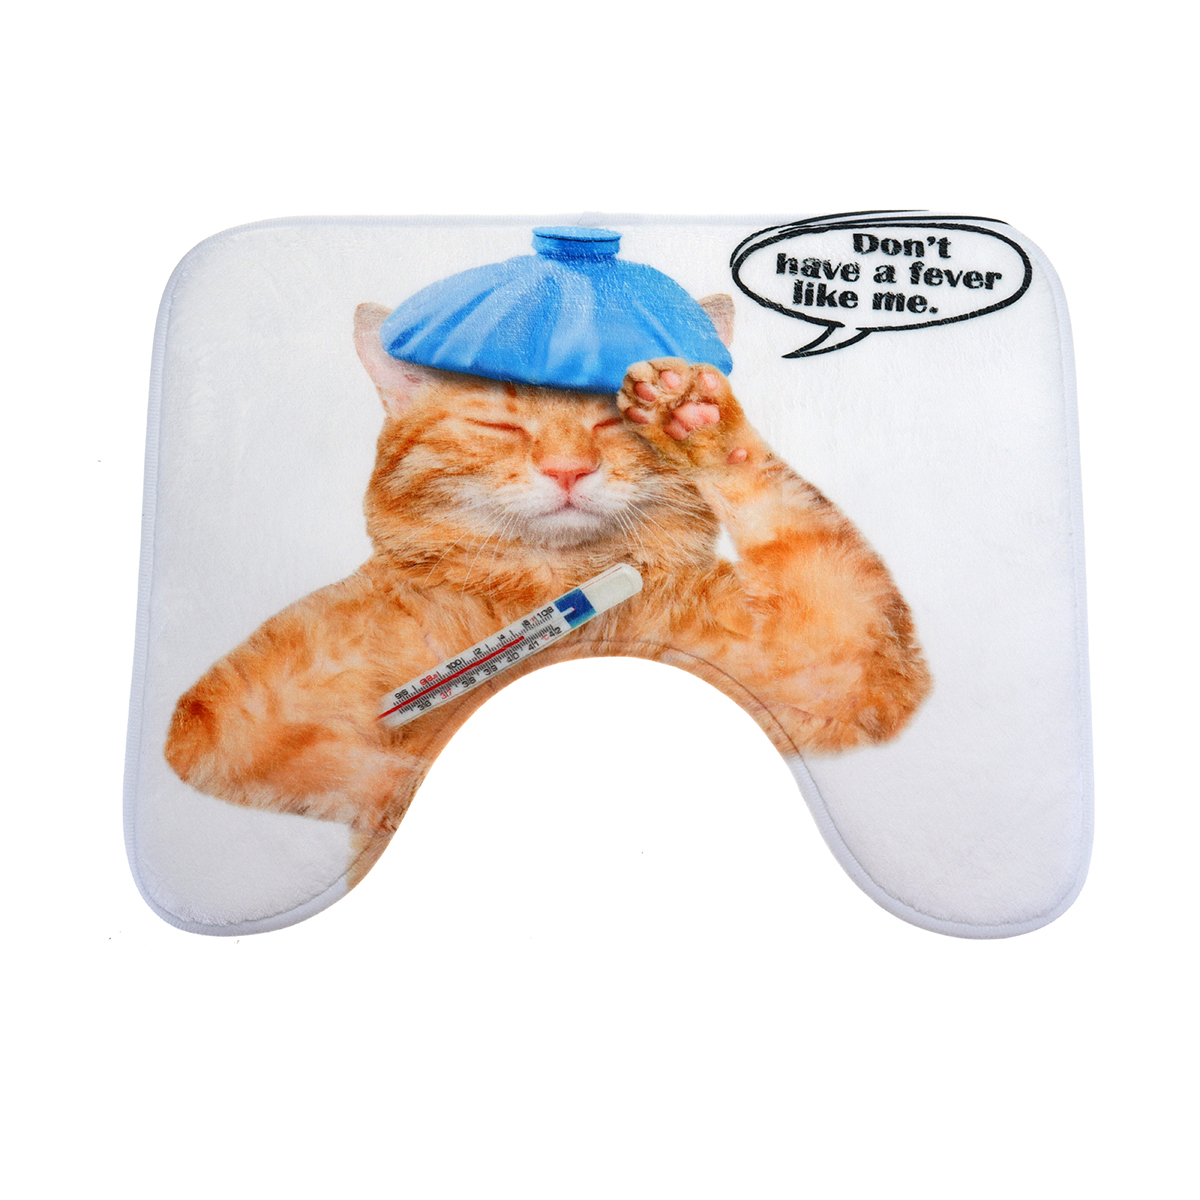 Toilet-Seat-Covers-Bathroom-Non-Slip-Thermometer-Fat-Cat-Pedestal-Rugs-Lid-Toilet-Covers-Bath-Mats-1411646-9